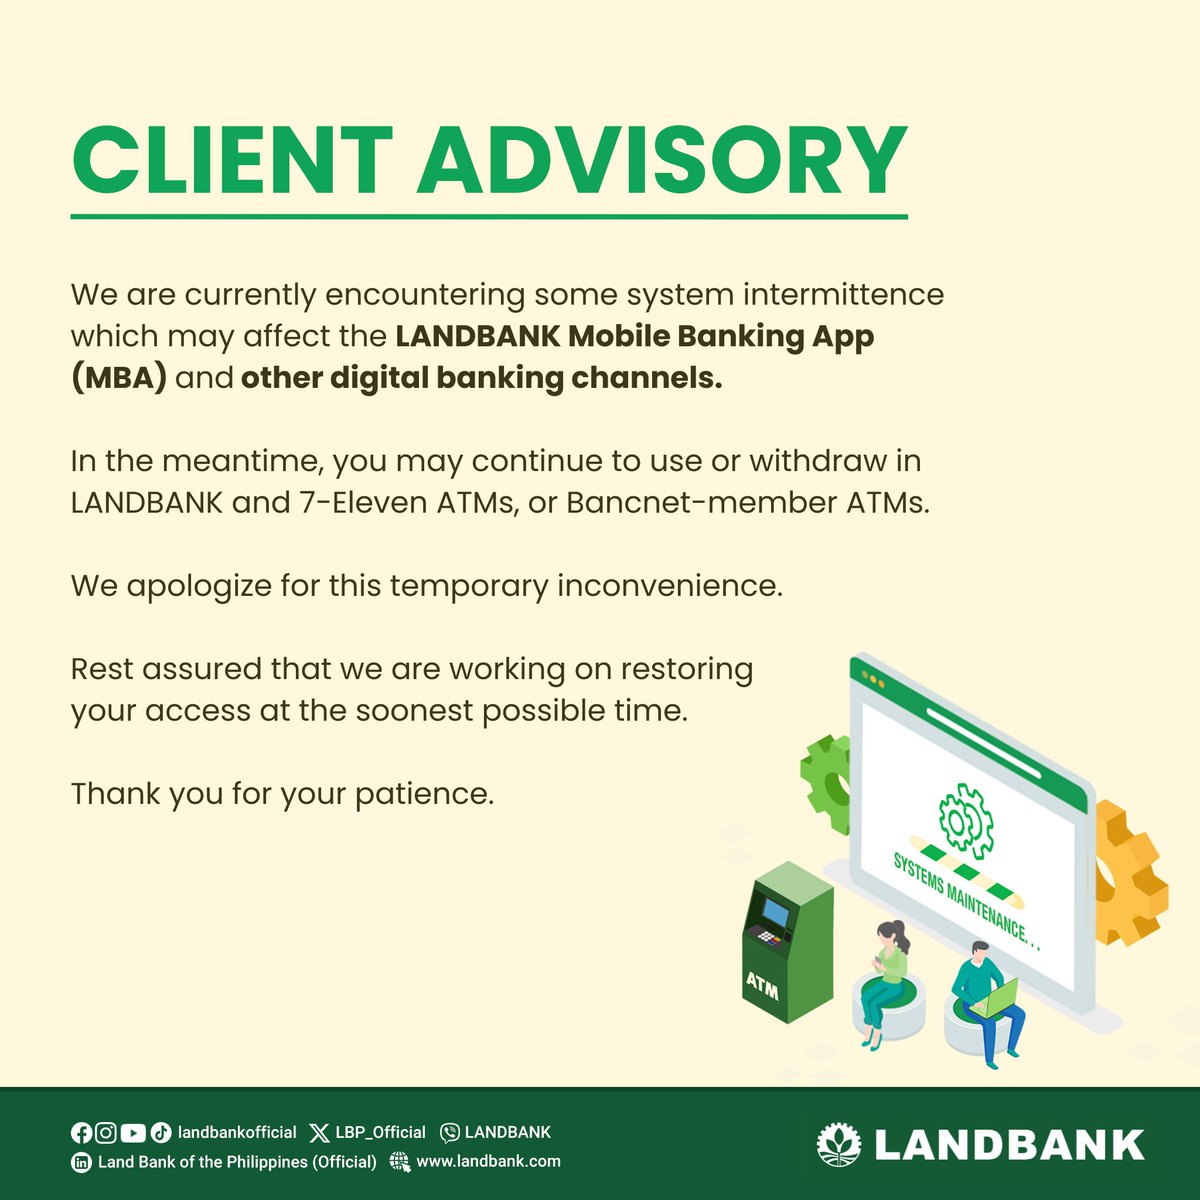 #LANDBANKClientAdvisory

We are currently encountering some system intermittence which may affect the LANDBANK Mobile Banking App (MBA) and other digital banking channels.

In the meantime, you may continue to use or withdraw in LANDBANK and 7-Eleven ATMs, or Bancnet-member ATMs.